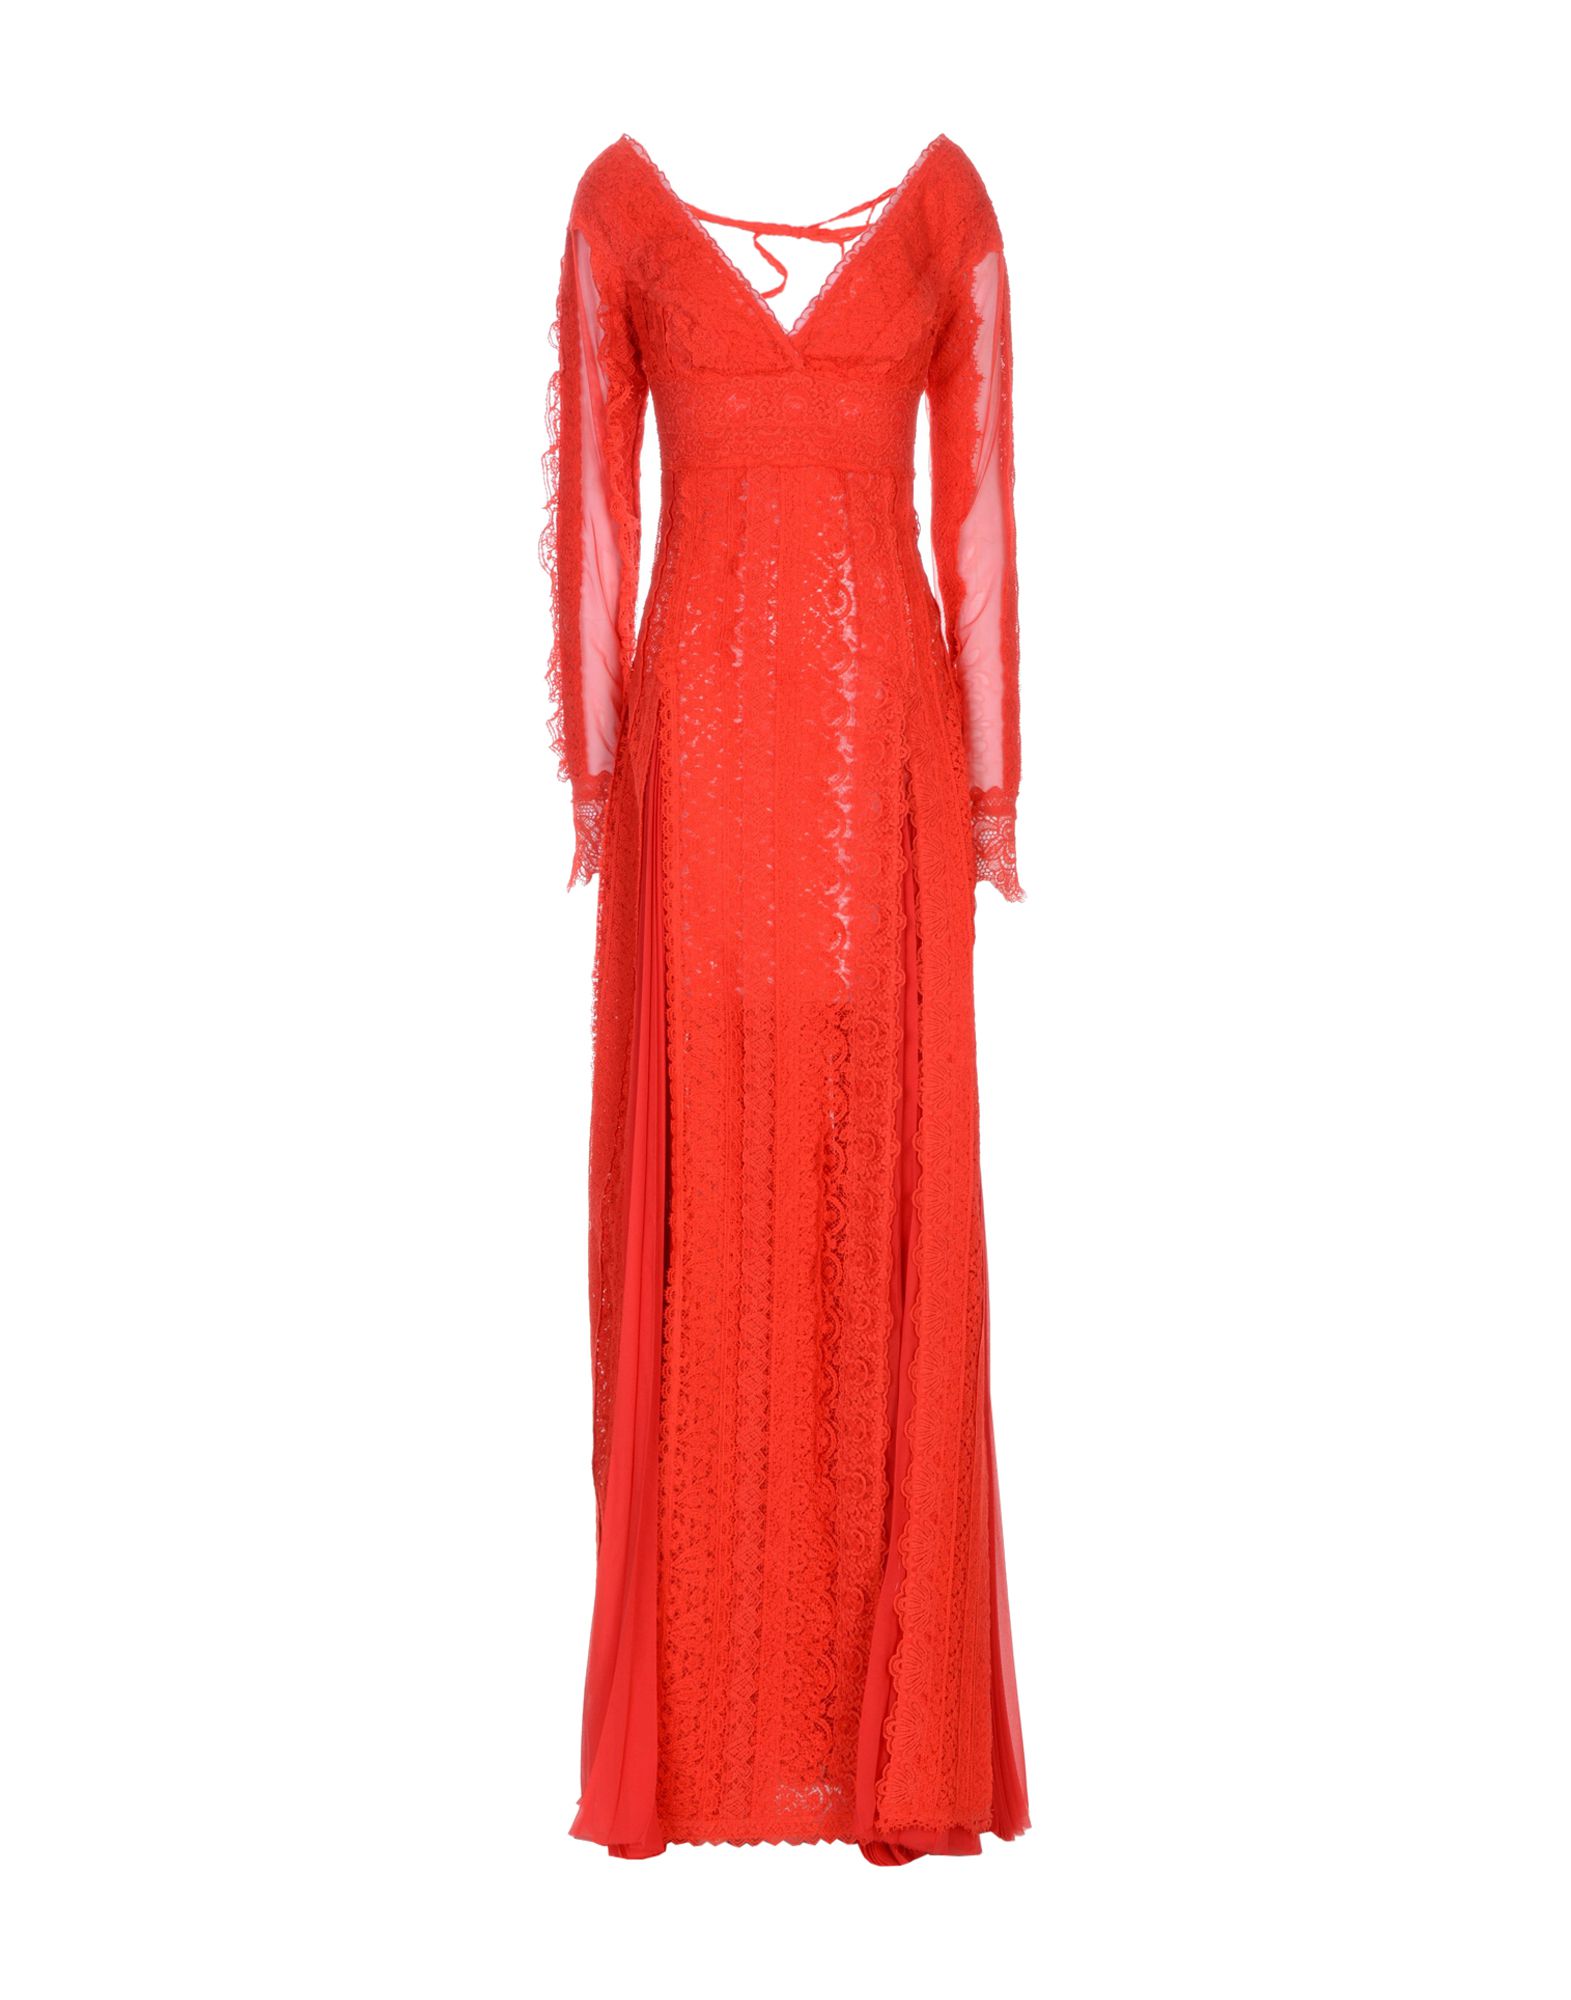 ERMANNO SCERVINO ERMANNO SCERVINO WOMAN LONG DRESS RED SIZE 6 POLYESTER, COTTON, POLYAMIDE, SILK,34853189DT 3